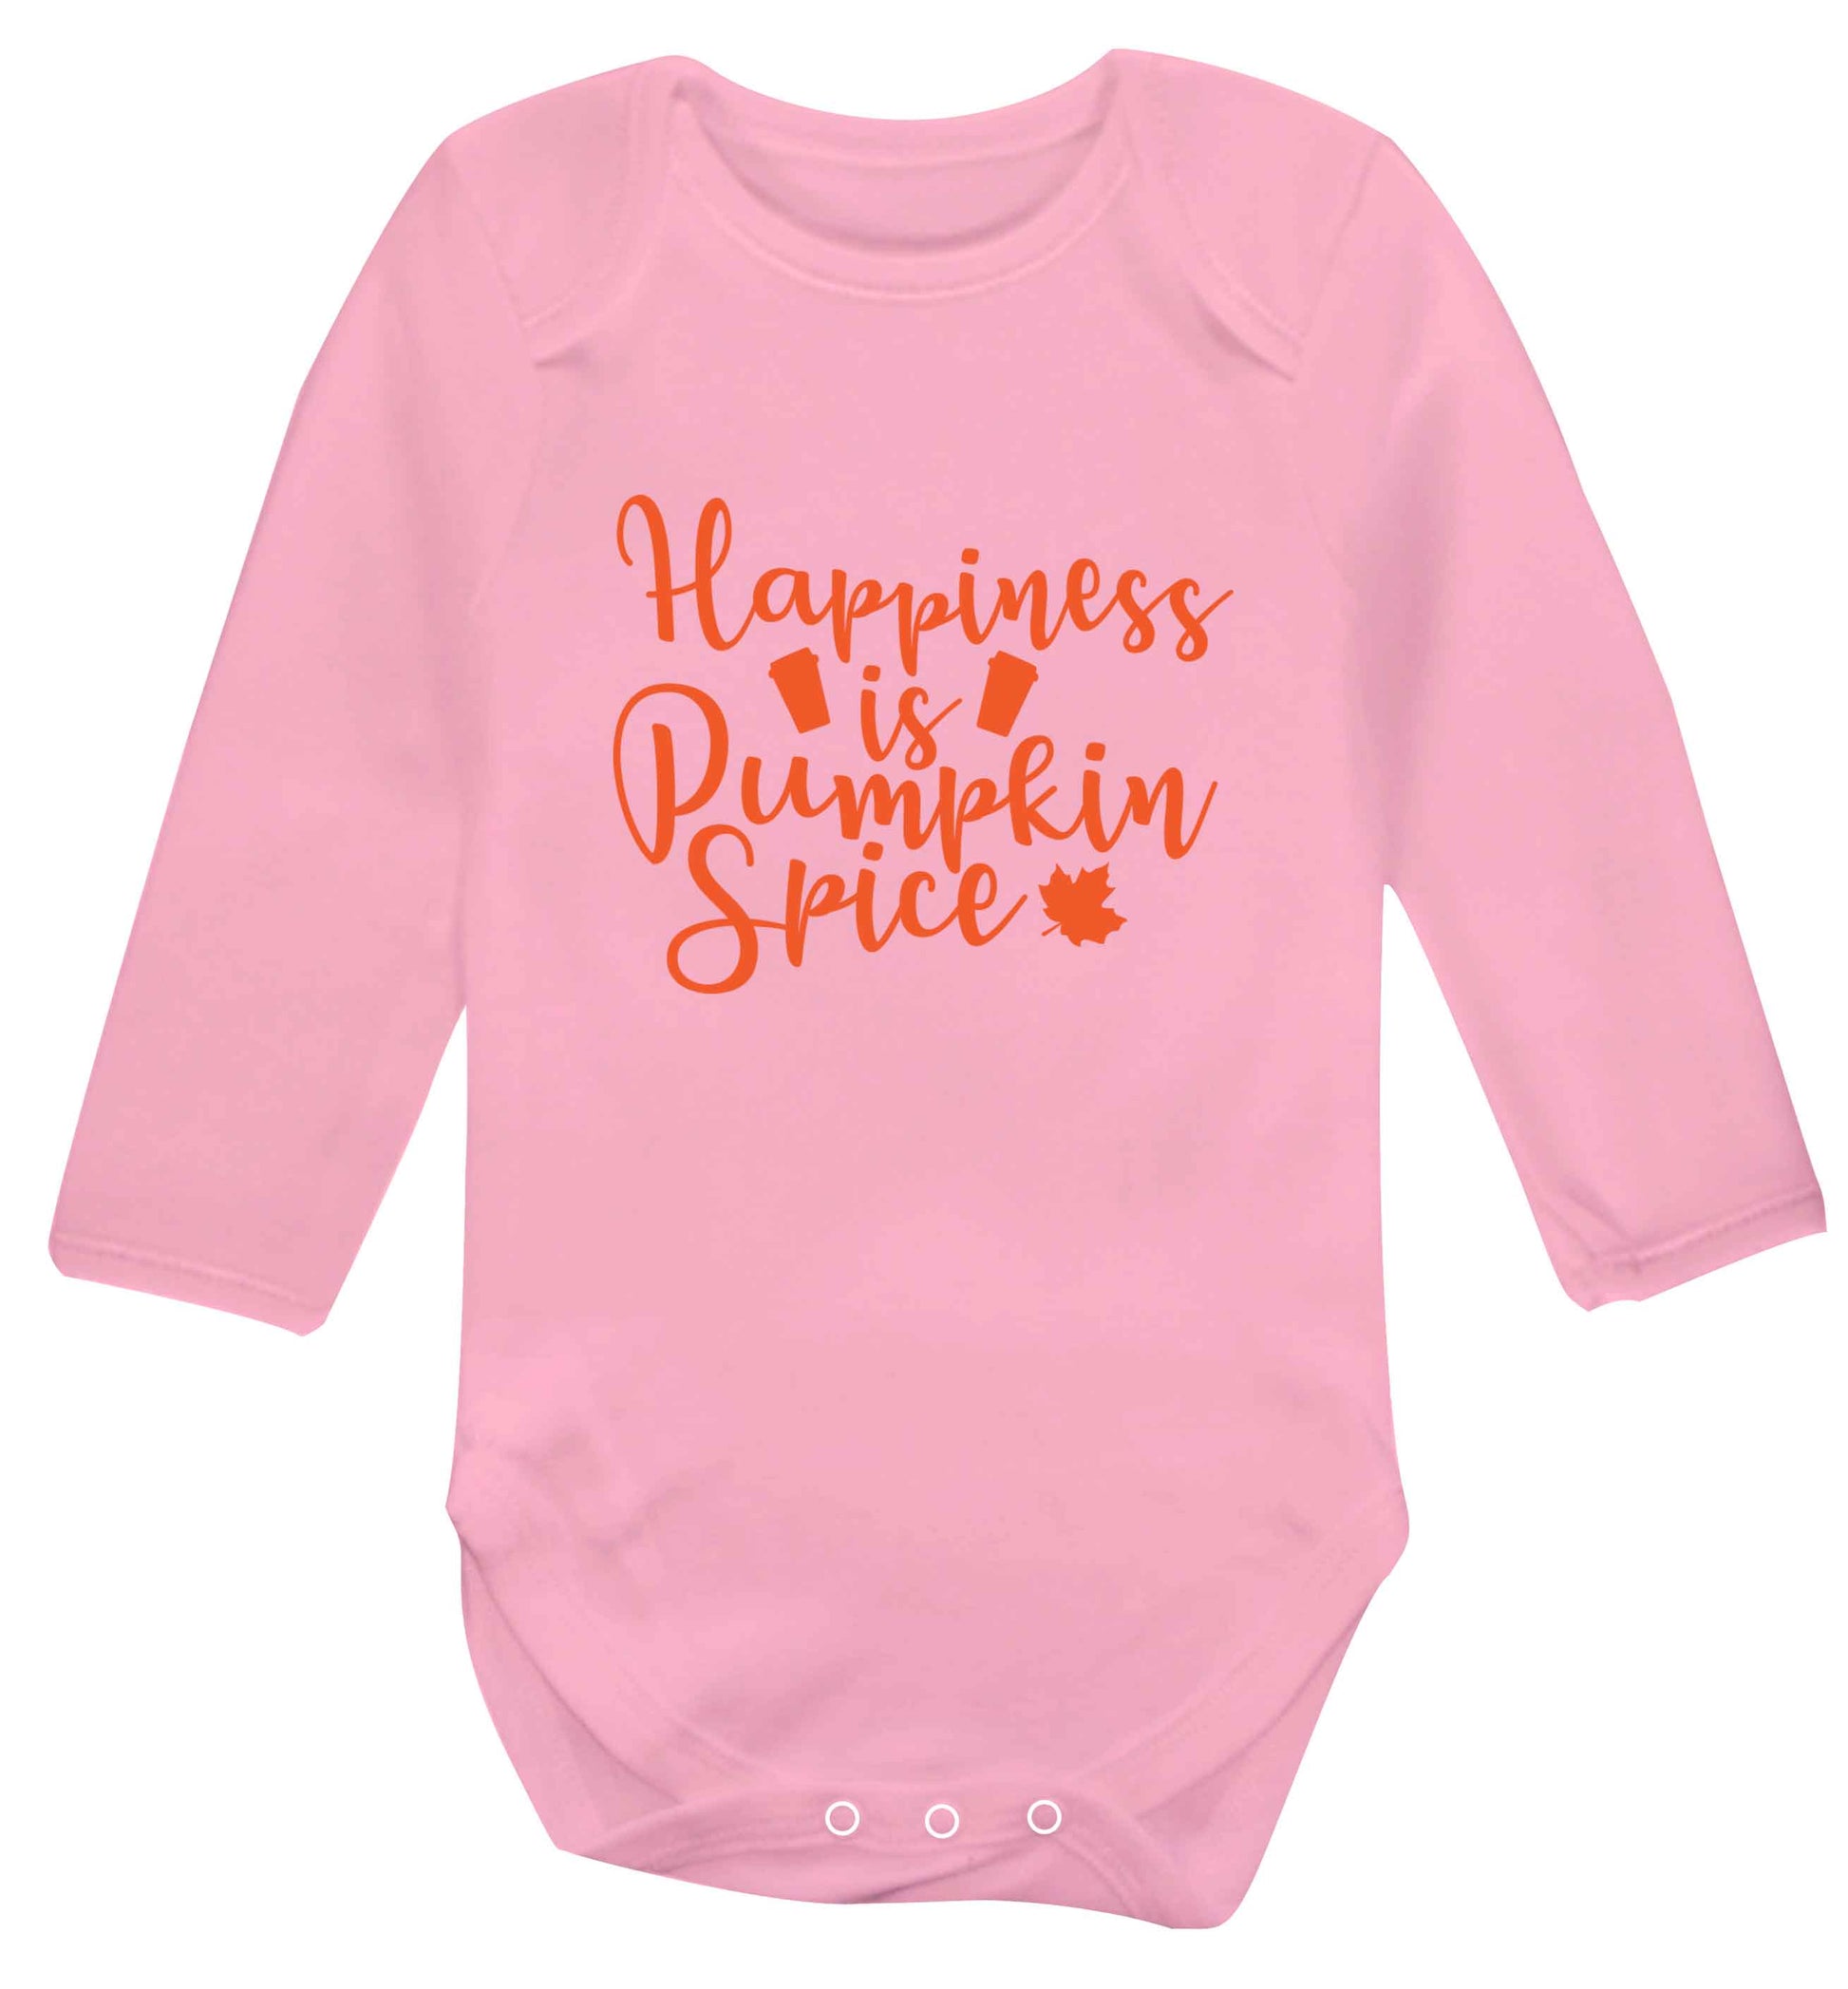 Happiness Pumpkin Spice baby vest long sleeved pale pink 6-12 months